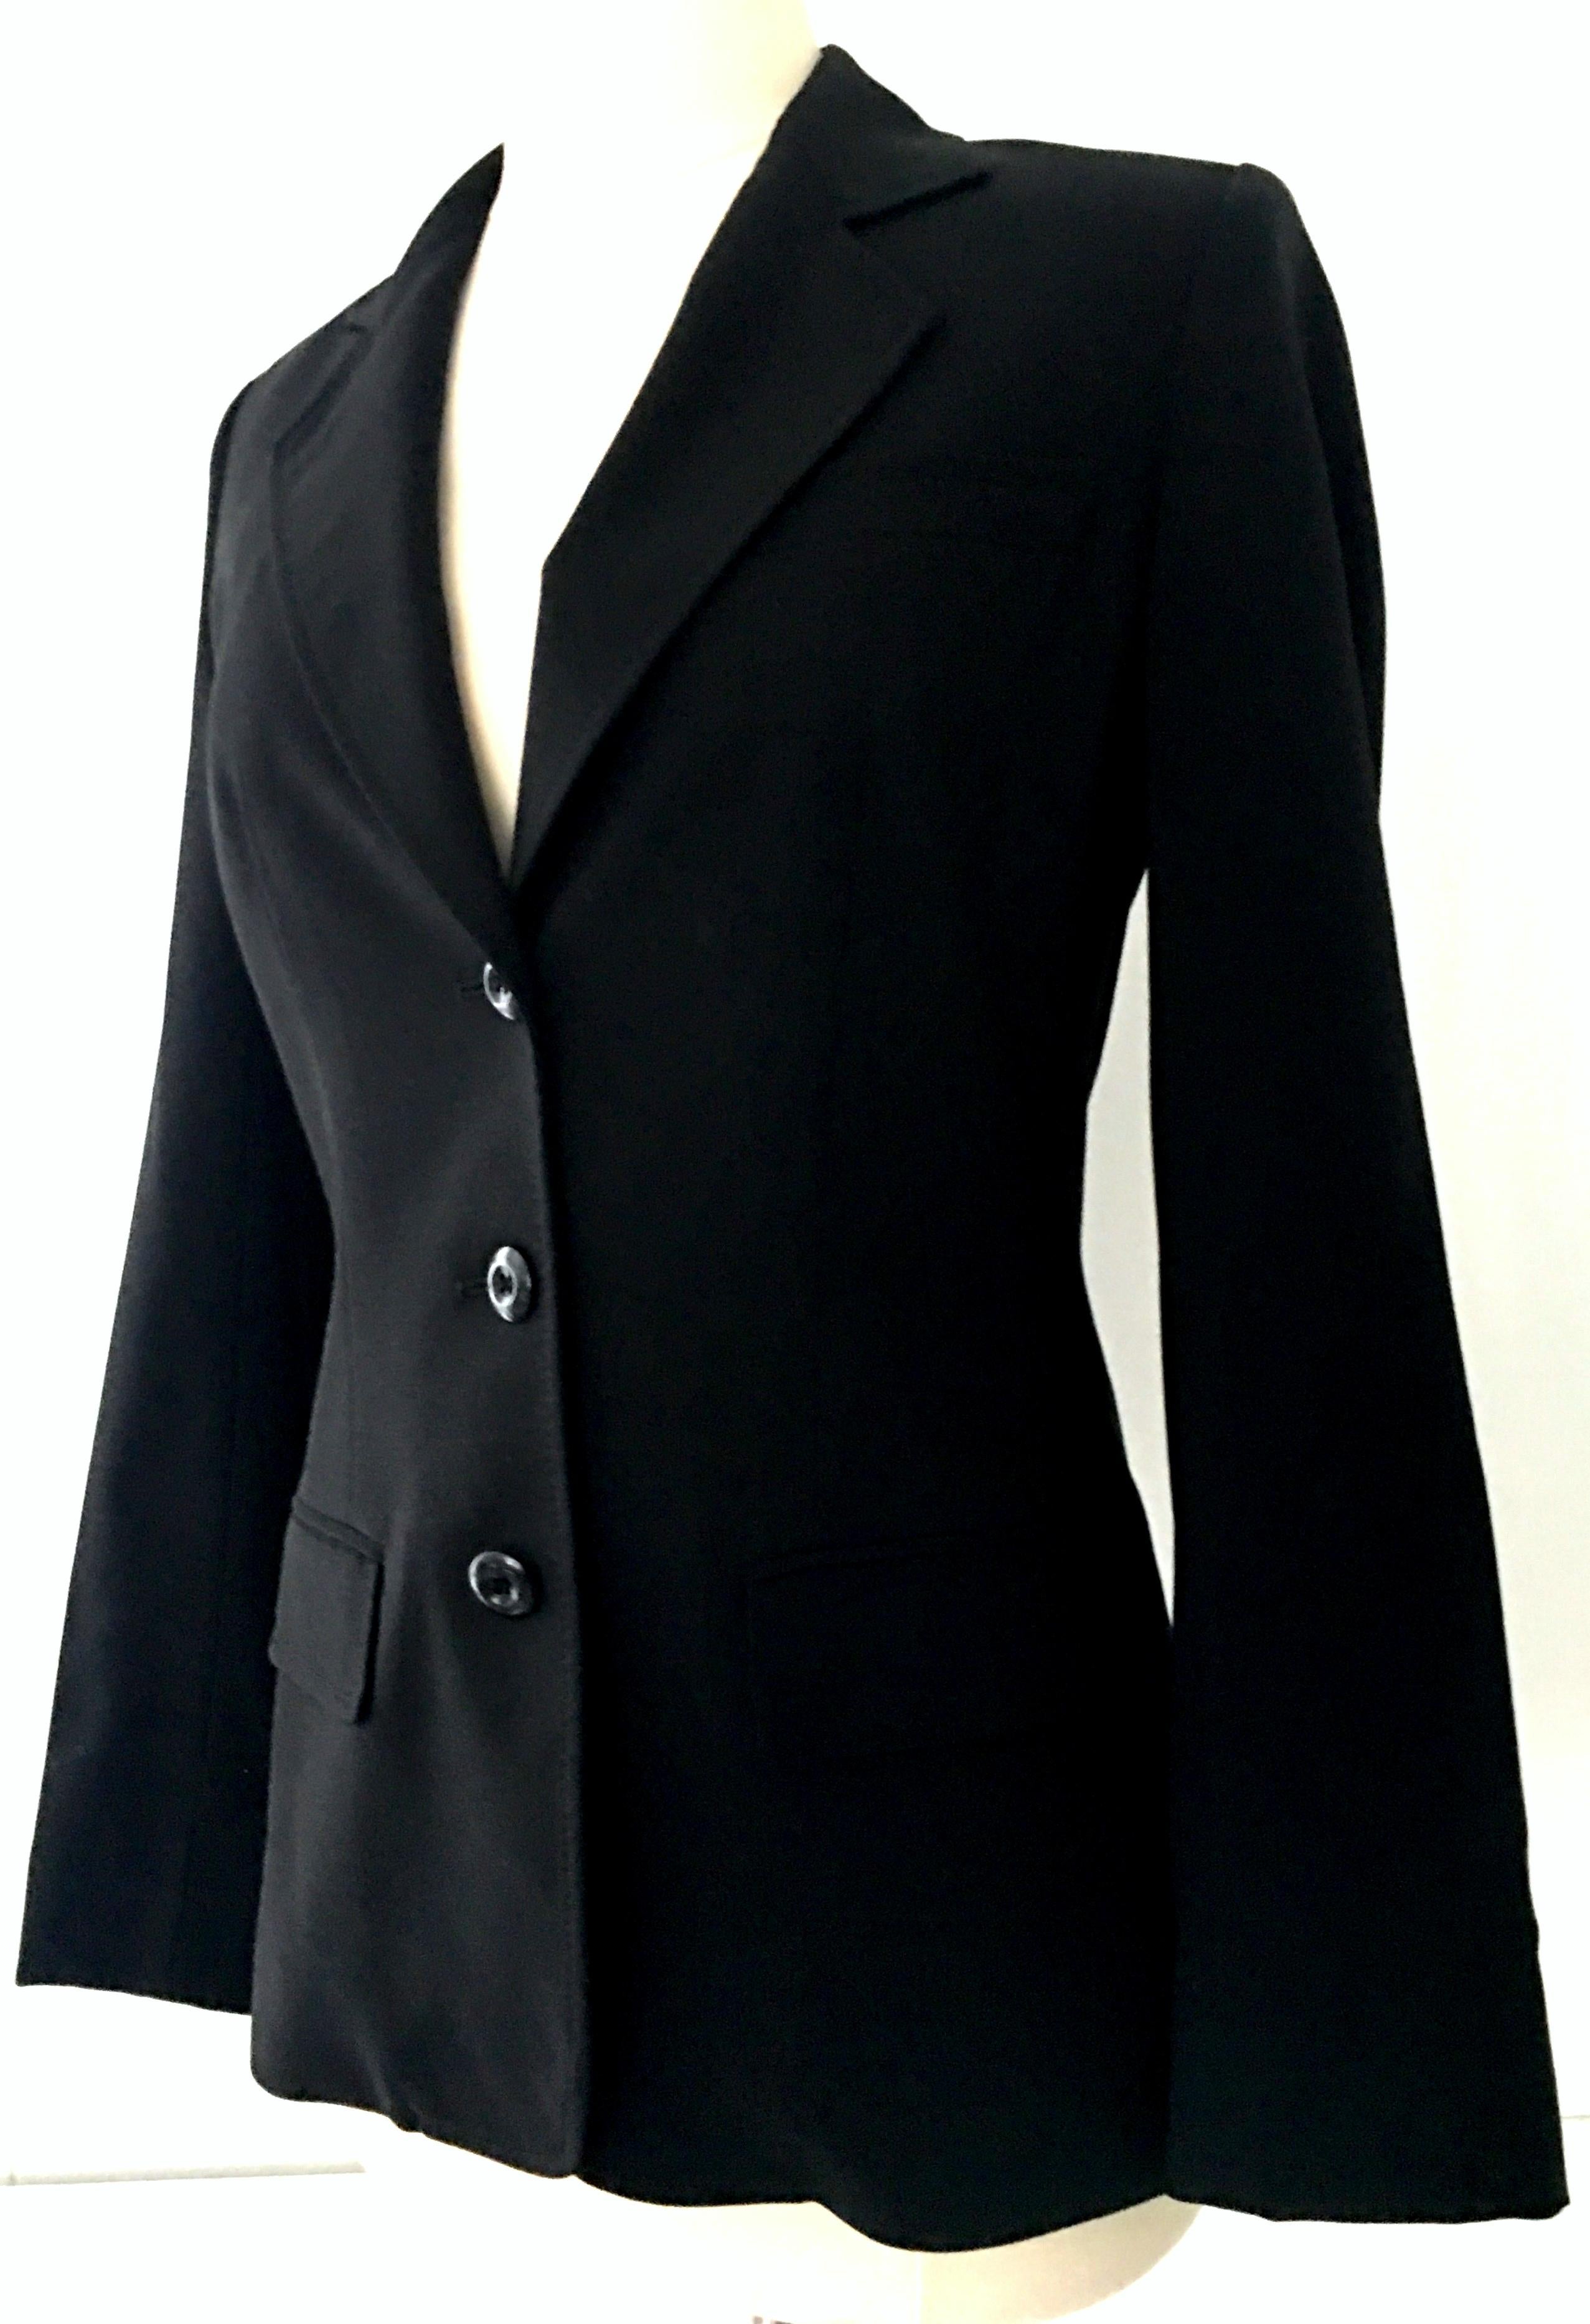 20th Century Christian Dior Paris Black Blazer Jacket-Size 6. This classic, timeless and well preserved wardrobe staple piece is executed in wool and polyester with beautiful stitching detail, three faux front pockets and three black 